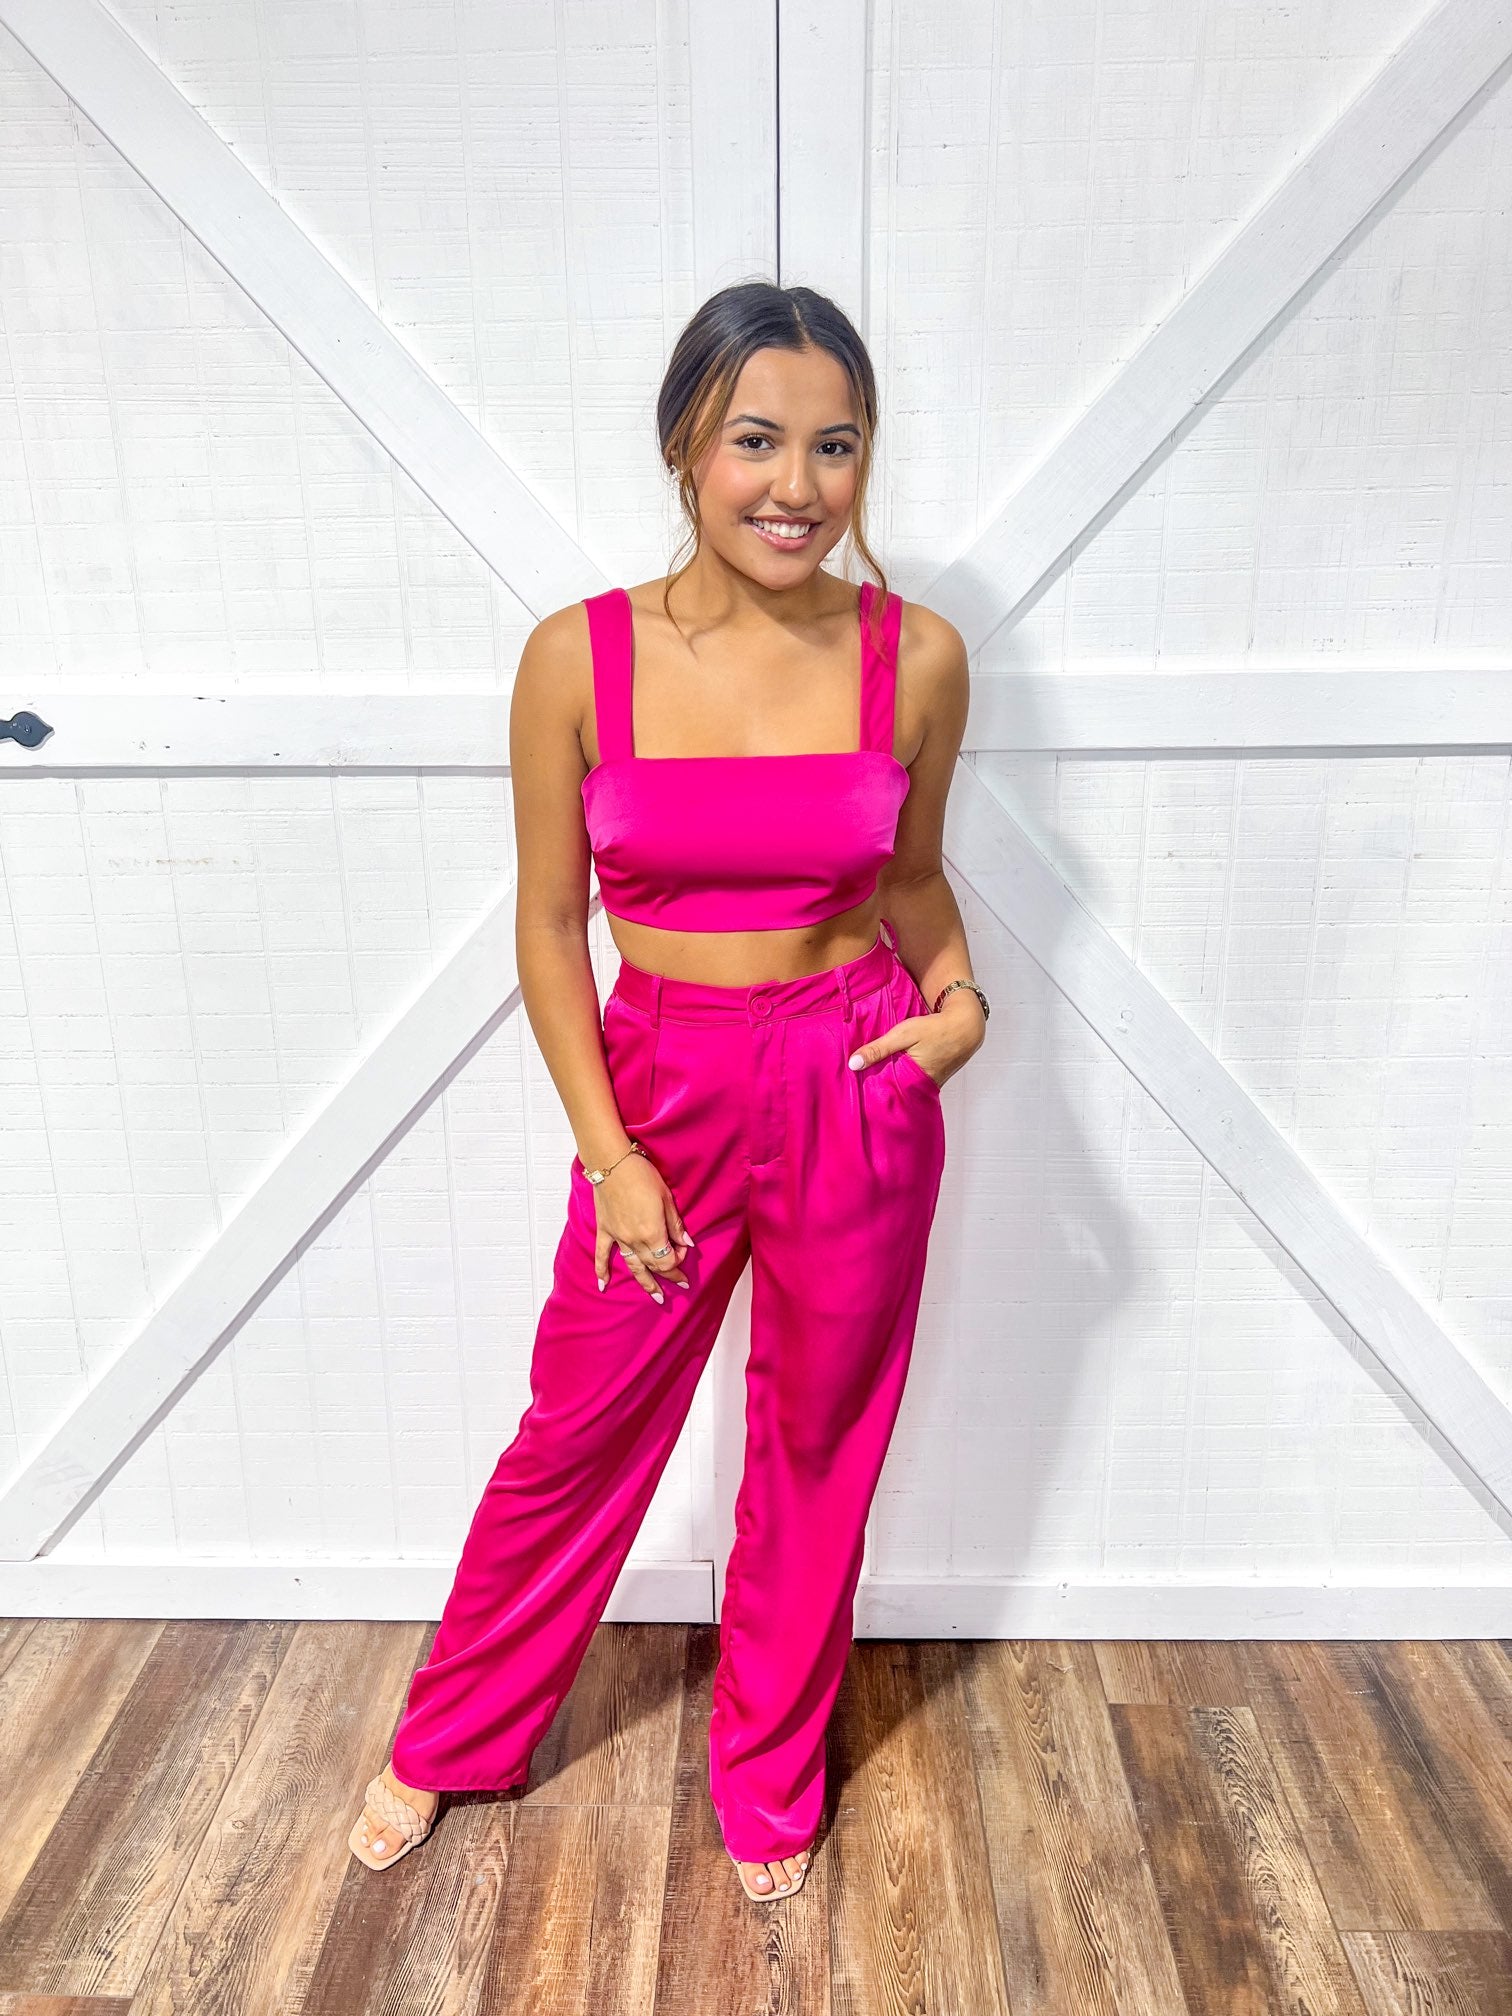 Magenta colored matching top and bottom set featuring a crop top and flowy pants